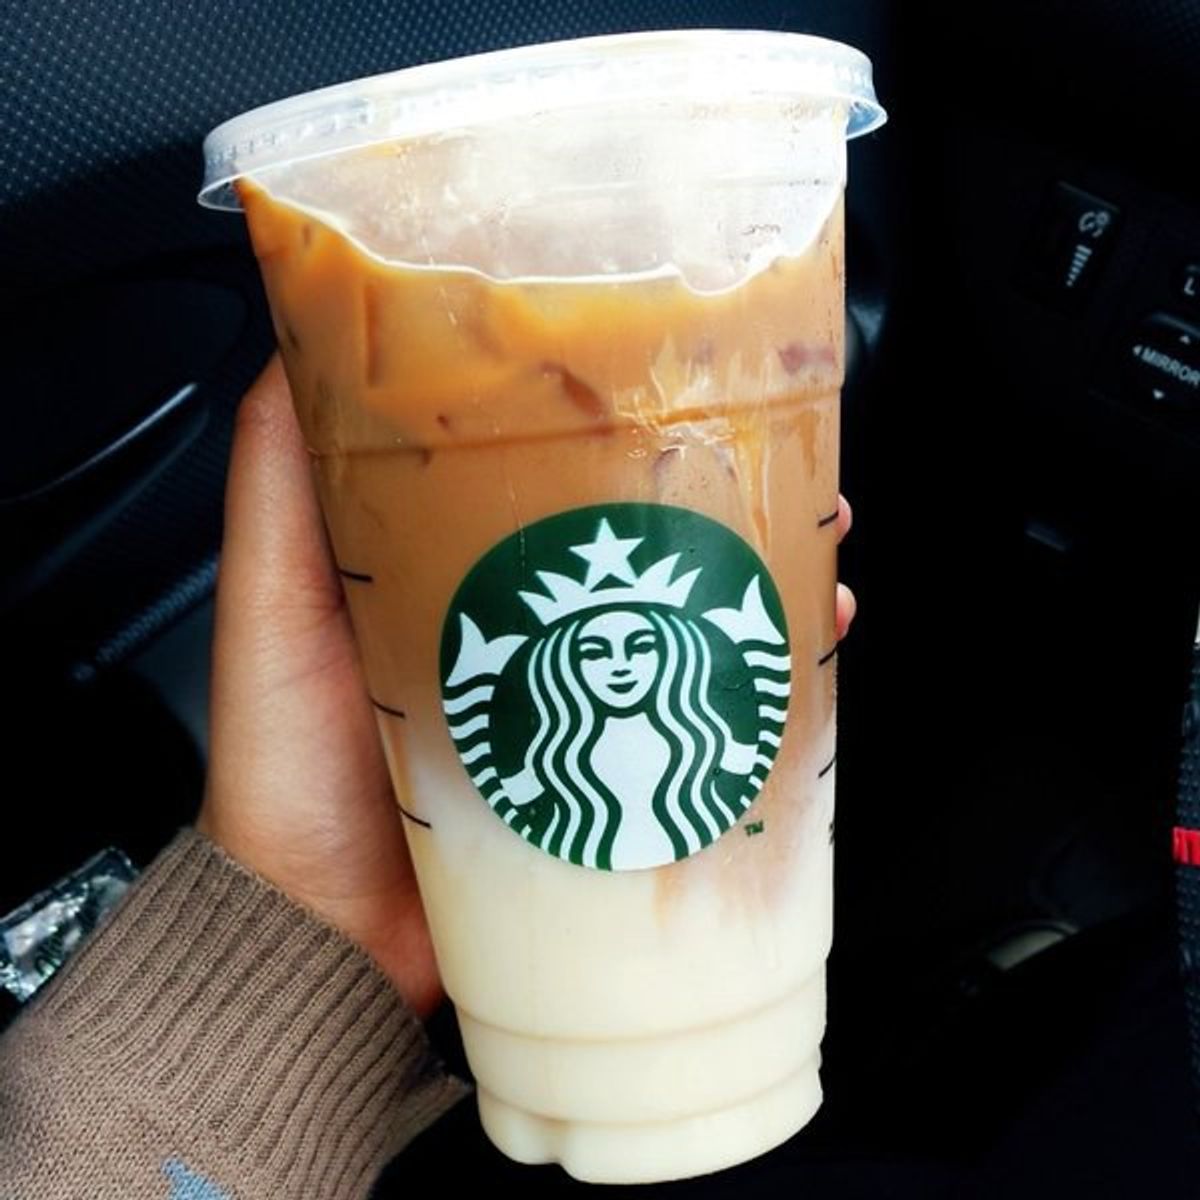 Let's Talk About The Amount Of Ice In Starbucks Drinks